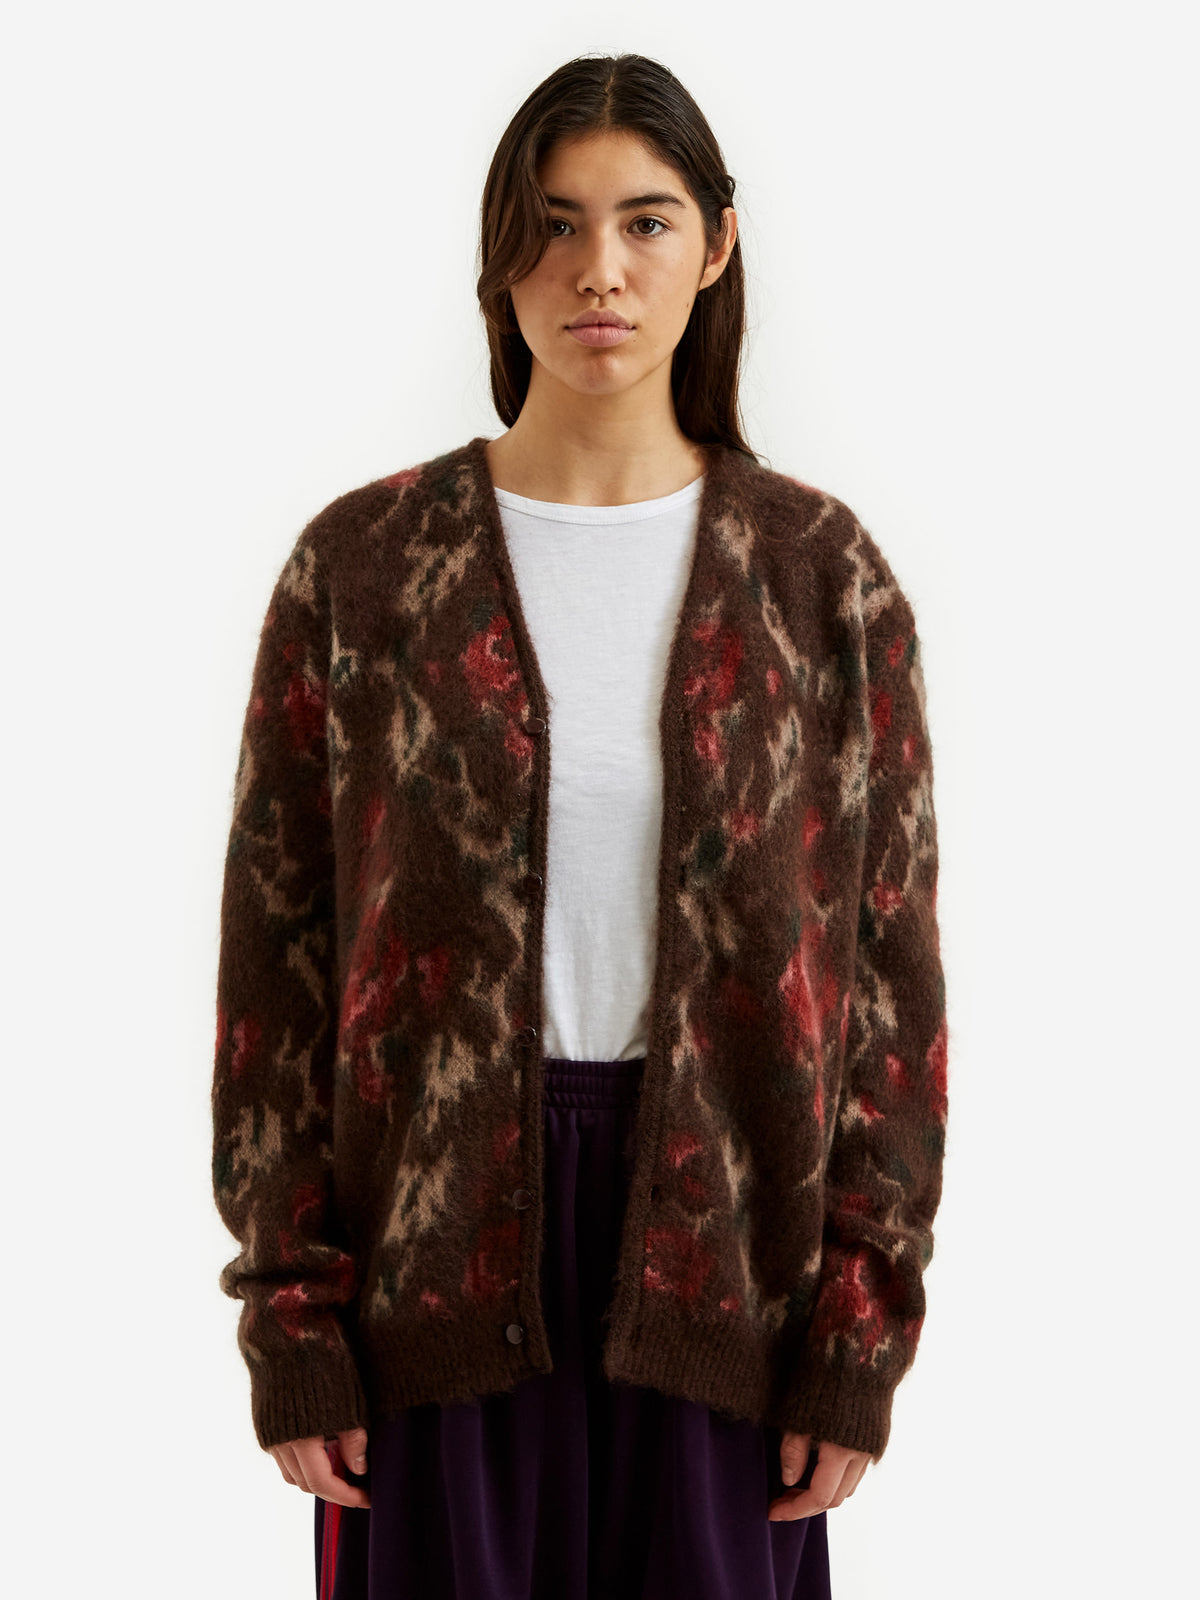 Save money on Needles Mohair Cardigan - Rose - Brown Needles and